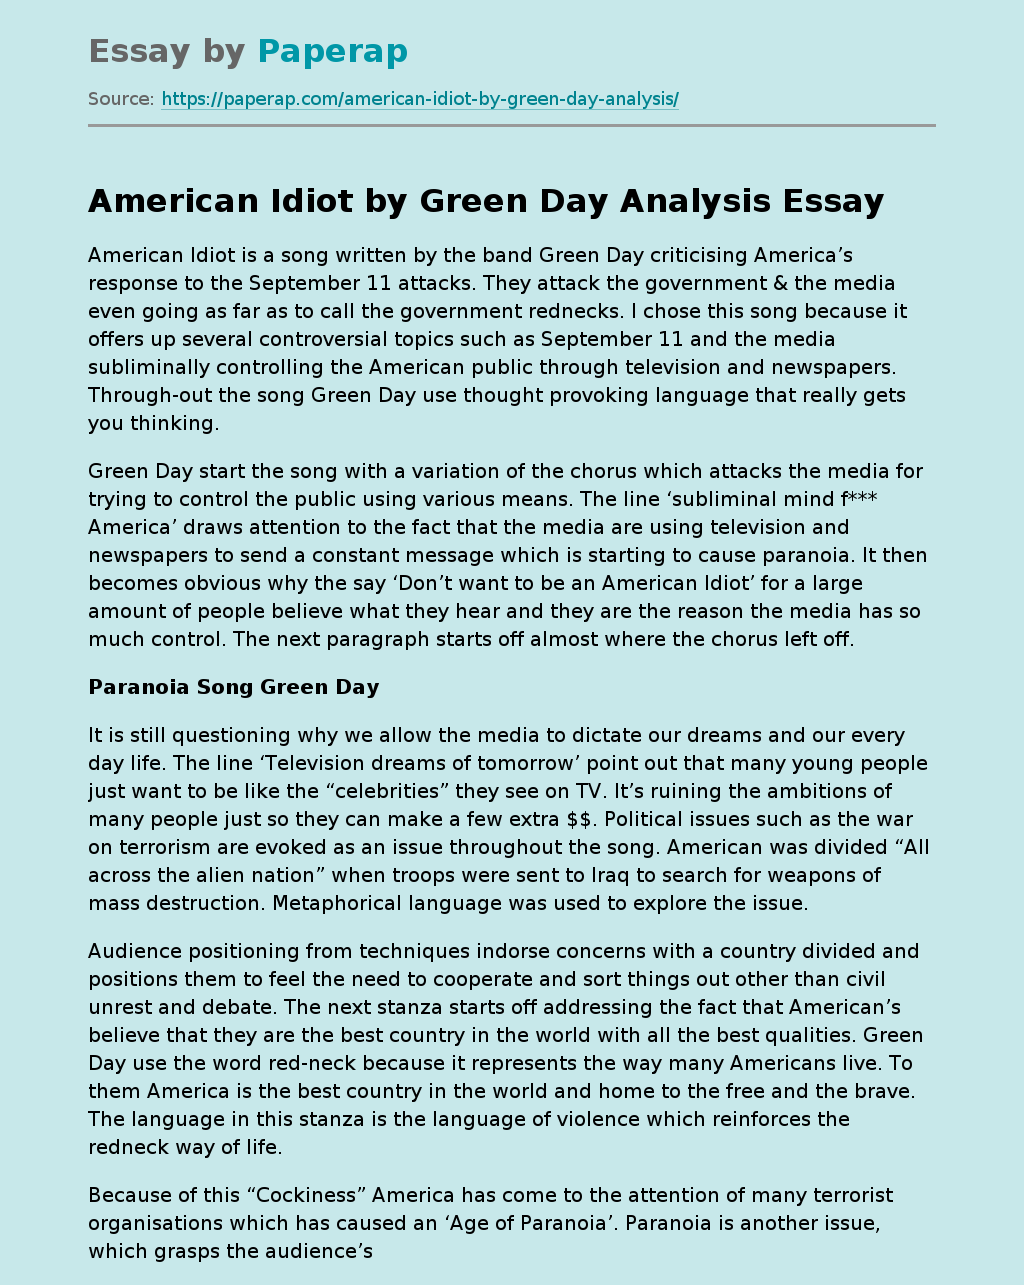 American Idiot by Green Day Analysis